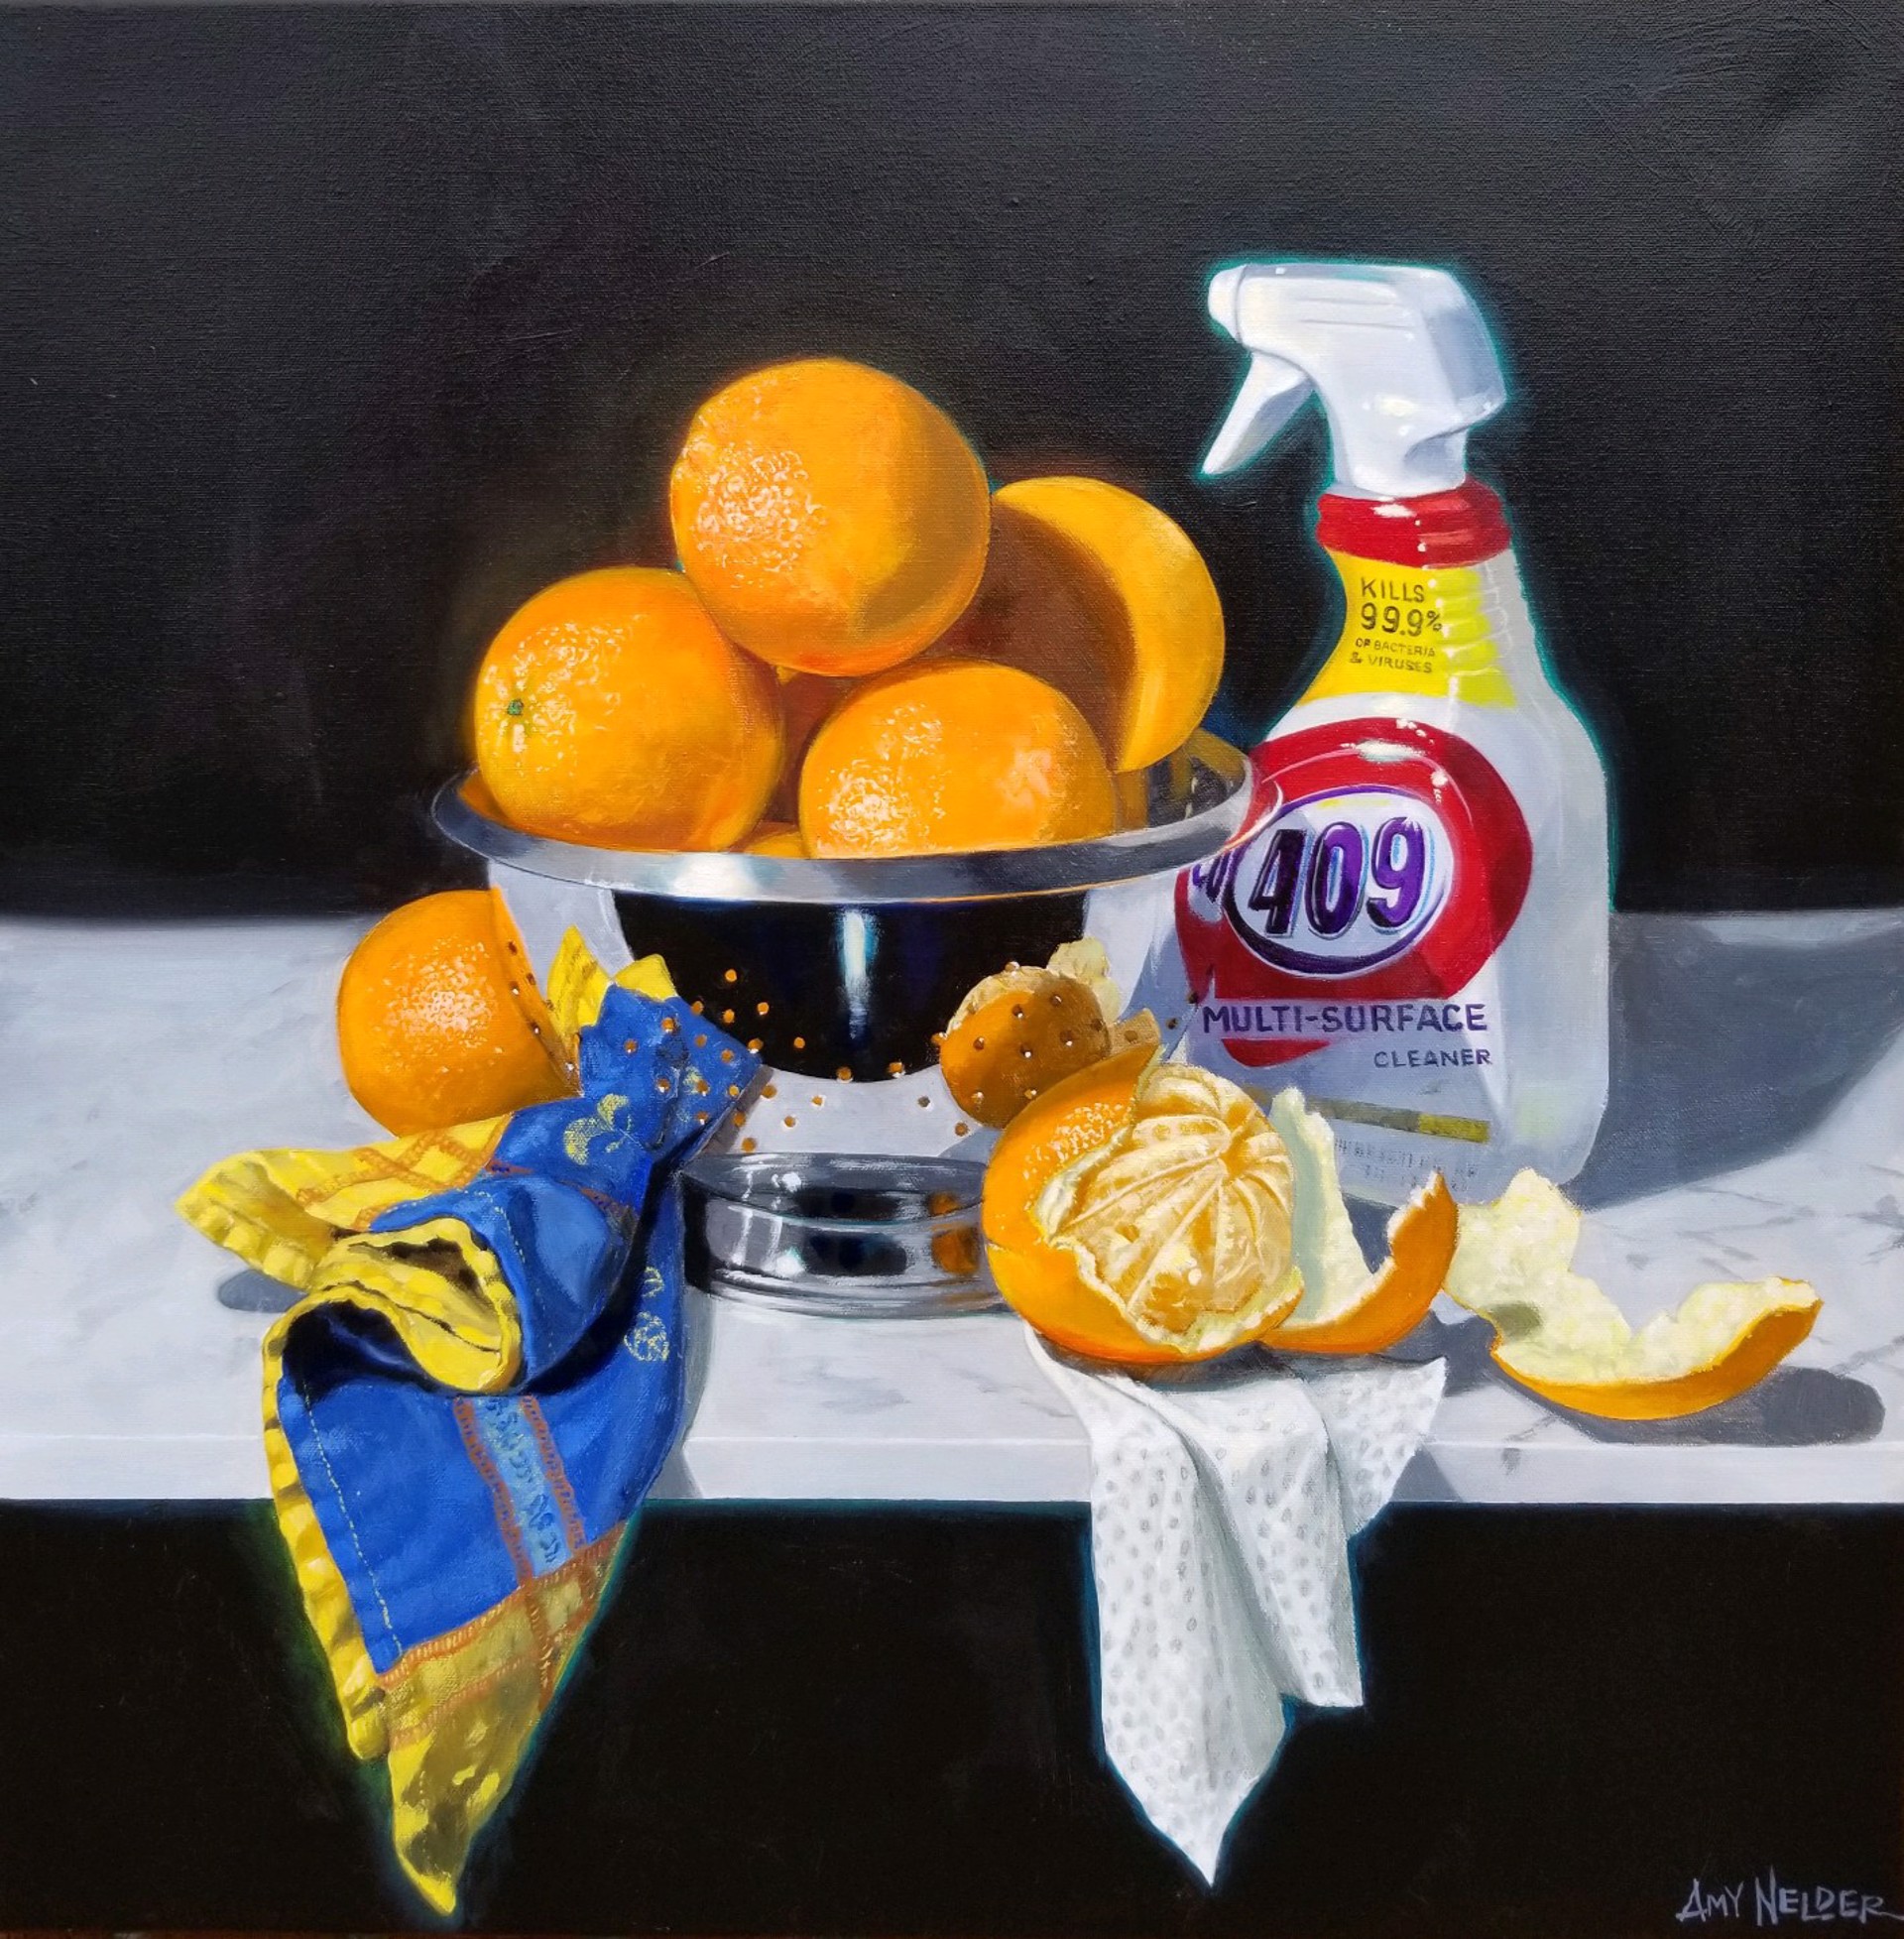 Sorry I'm late to Zoom, I was disinfecting my (organic) oranges by Amy Nelder